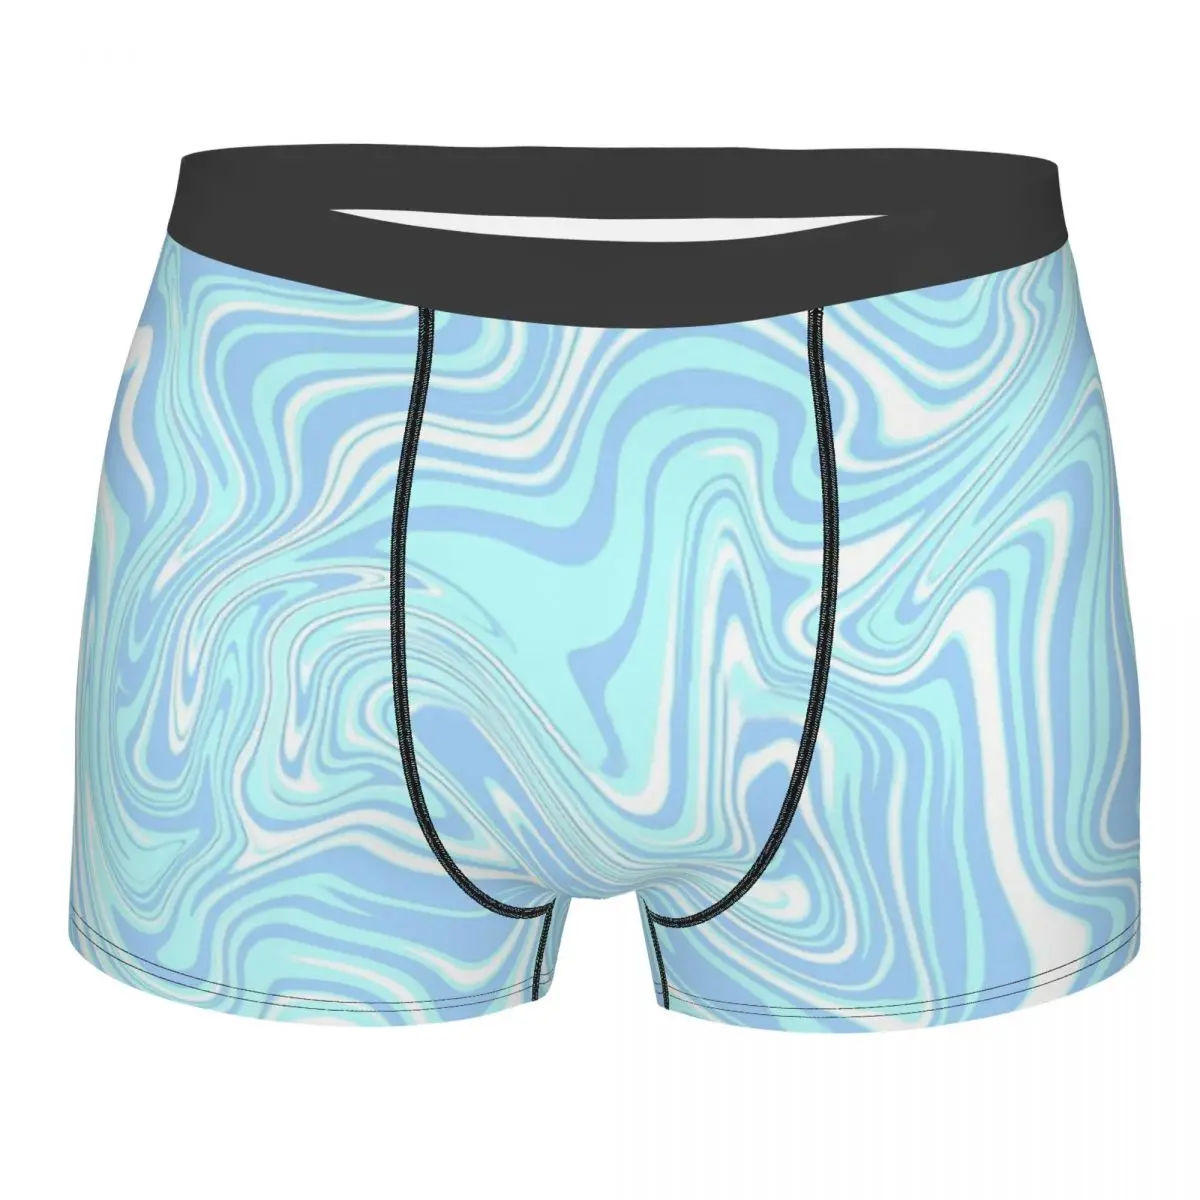 

Fresh Pale Blue White Abstract Swirl Marbling Marbled Marble Pattern Underpants Panties Men's Underwear Sexy Shorts Boxer Briefs